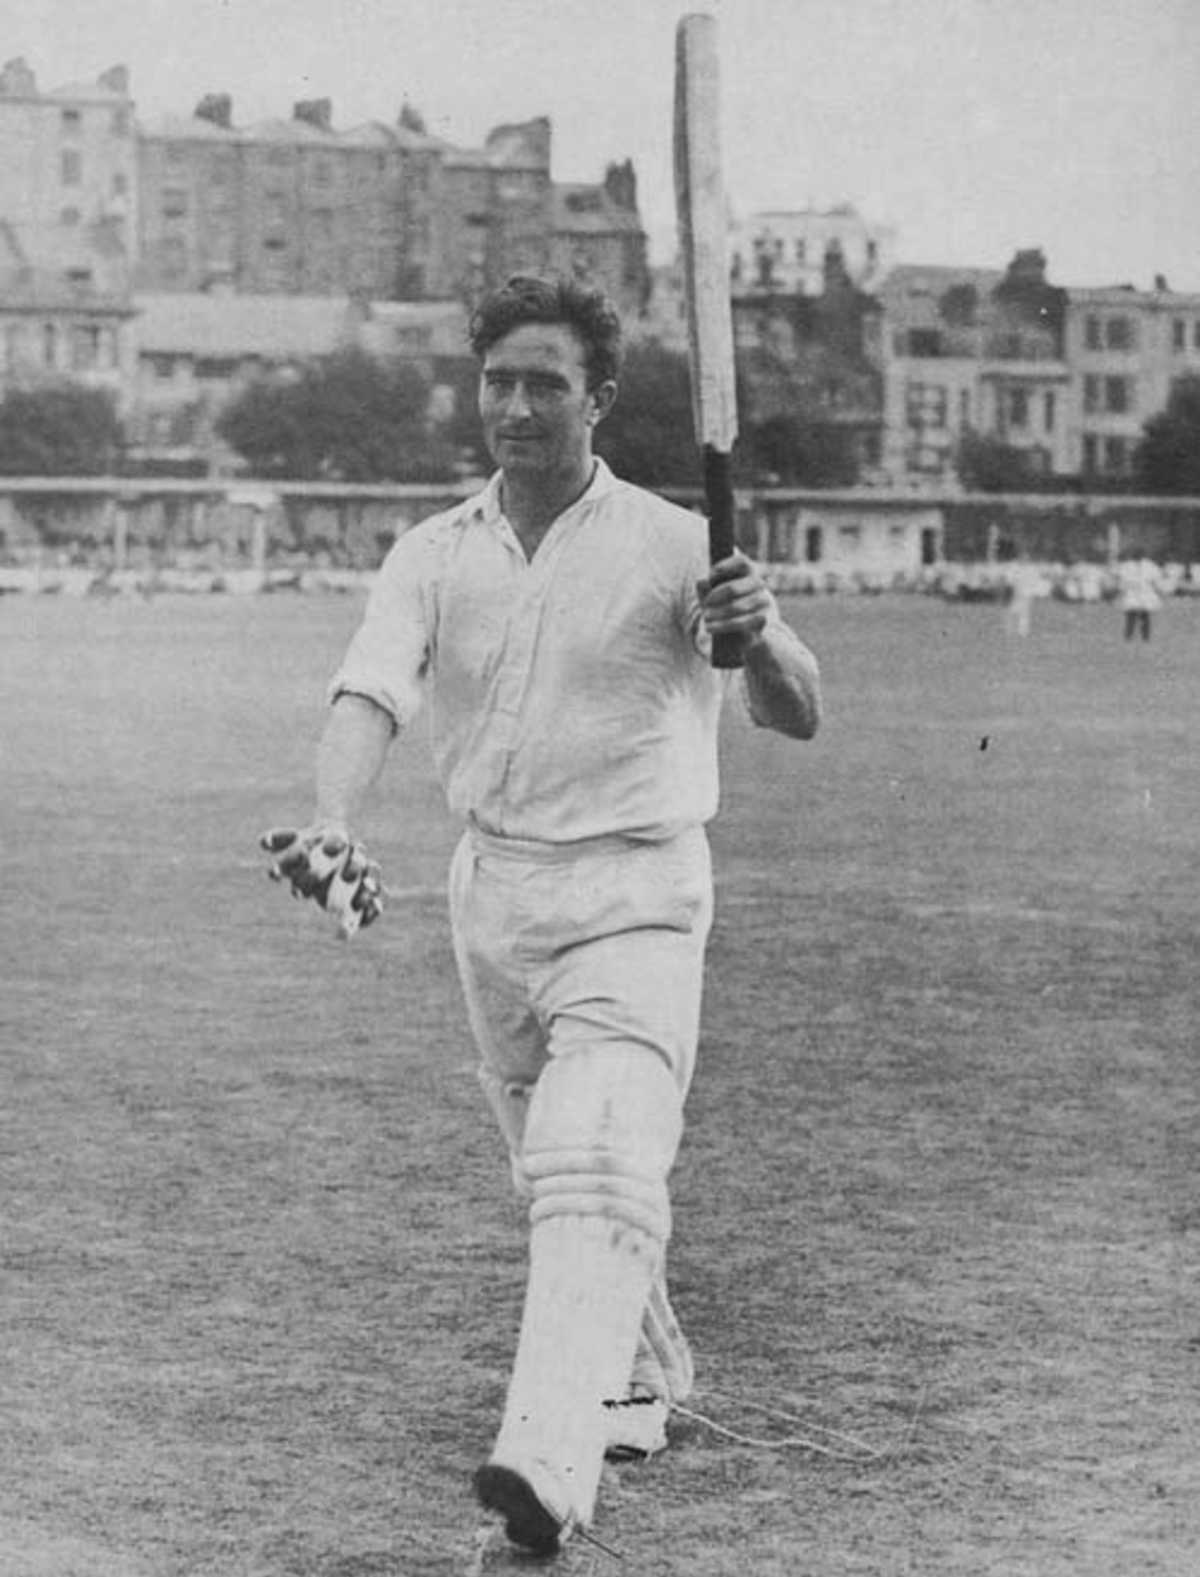 Denis Compt0n returns to the pavilion after breaking Tom Hayward's record of 3518 runs made in 1906, Hastings, 1947